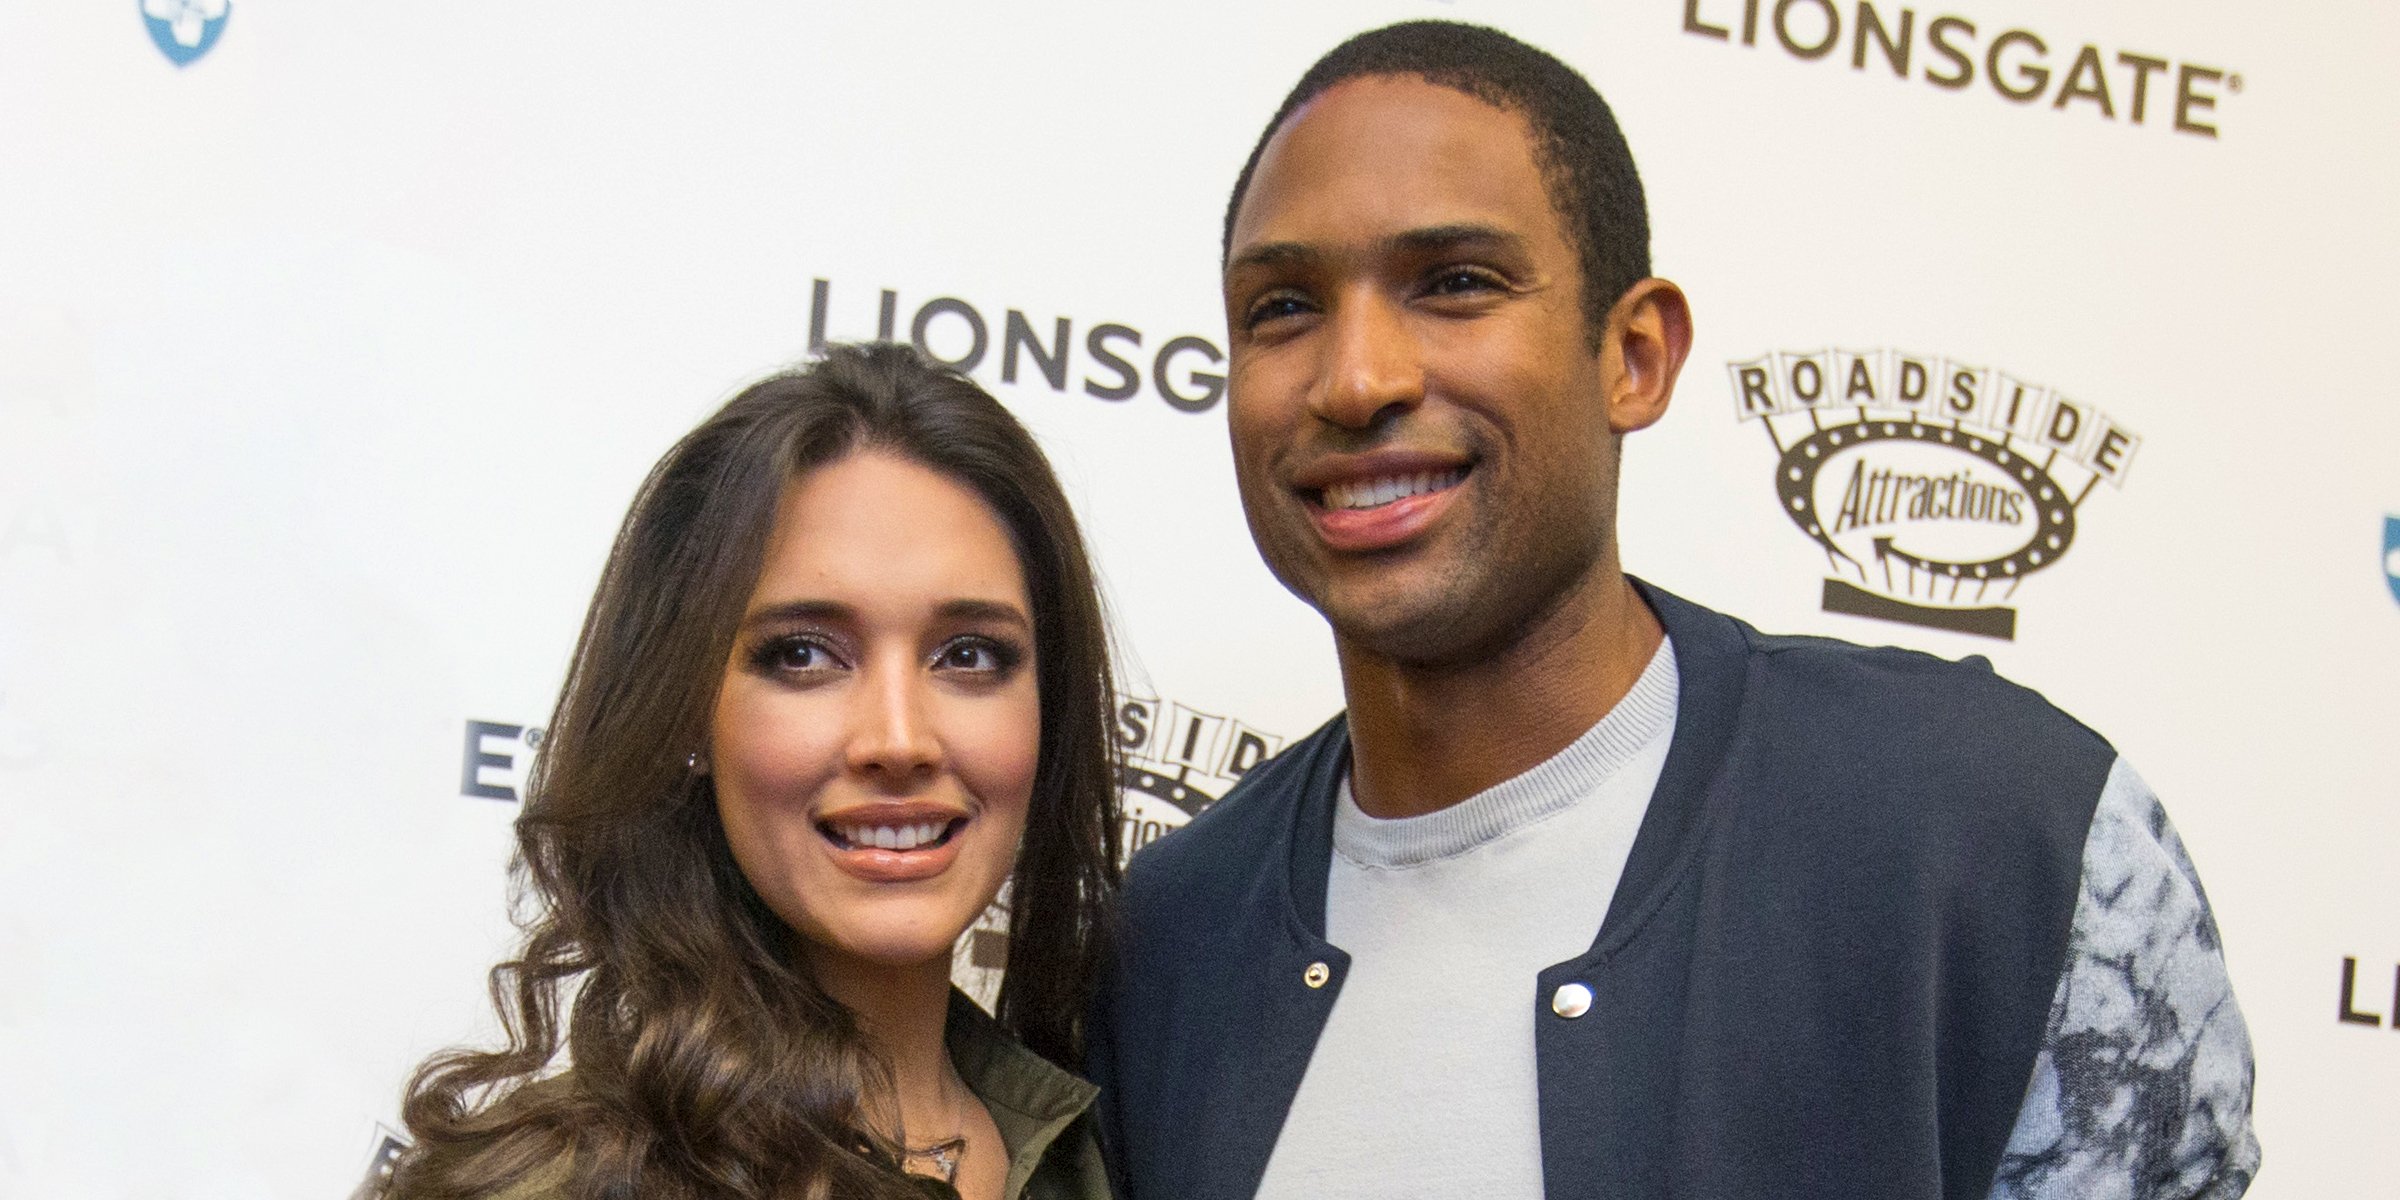 Amelia Vega and Al Horford | Source: Getty Images